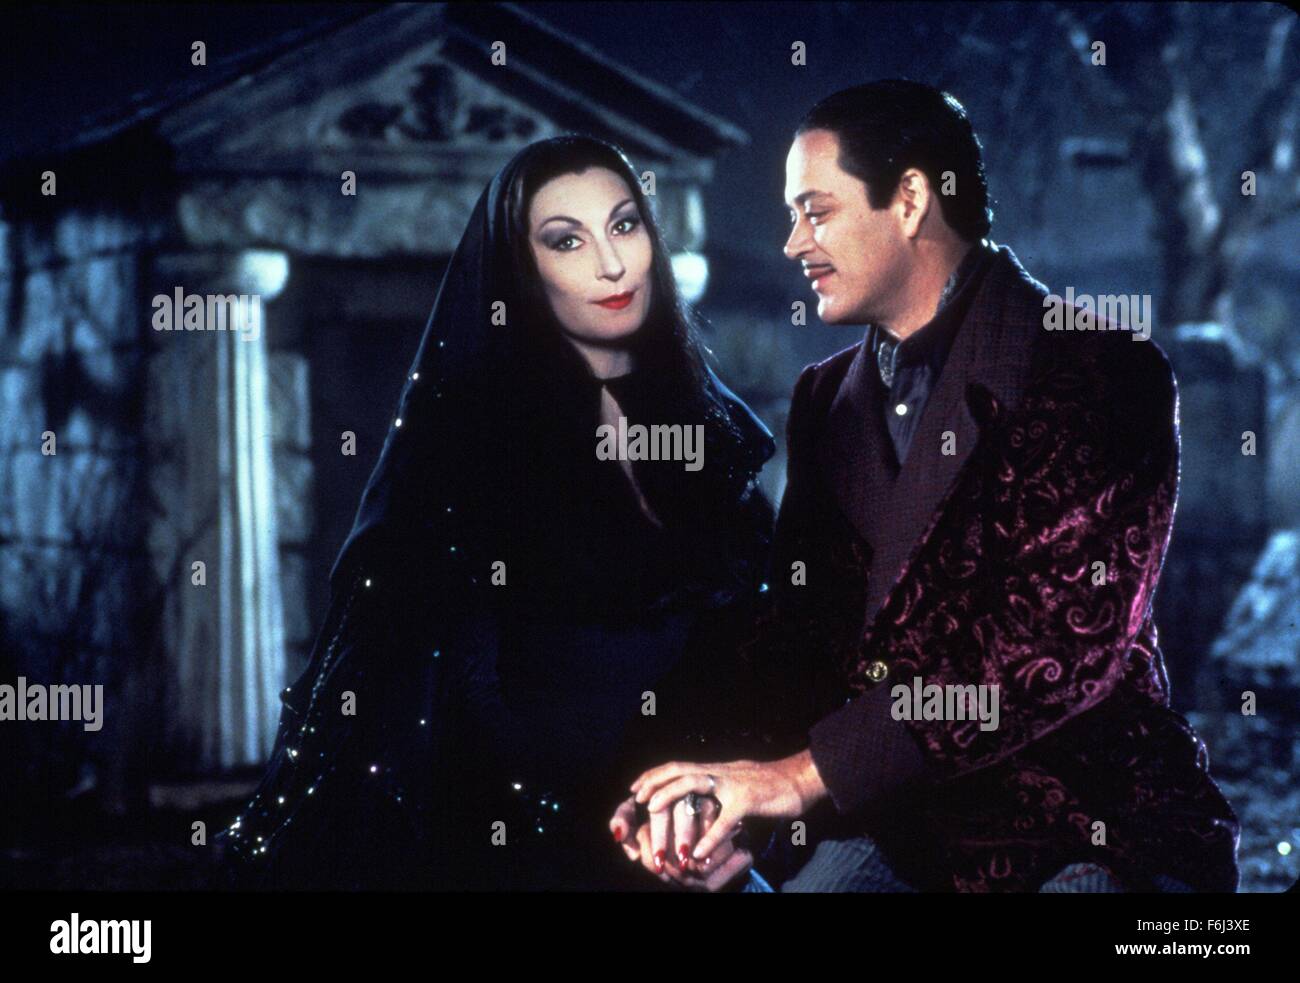 1993, Film Title: ADDAMS FAMILY VALUES, Director: BARRY SONNENFELD ...